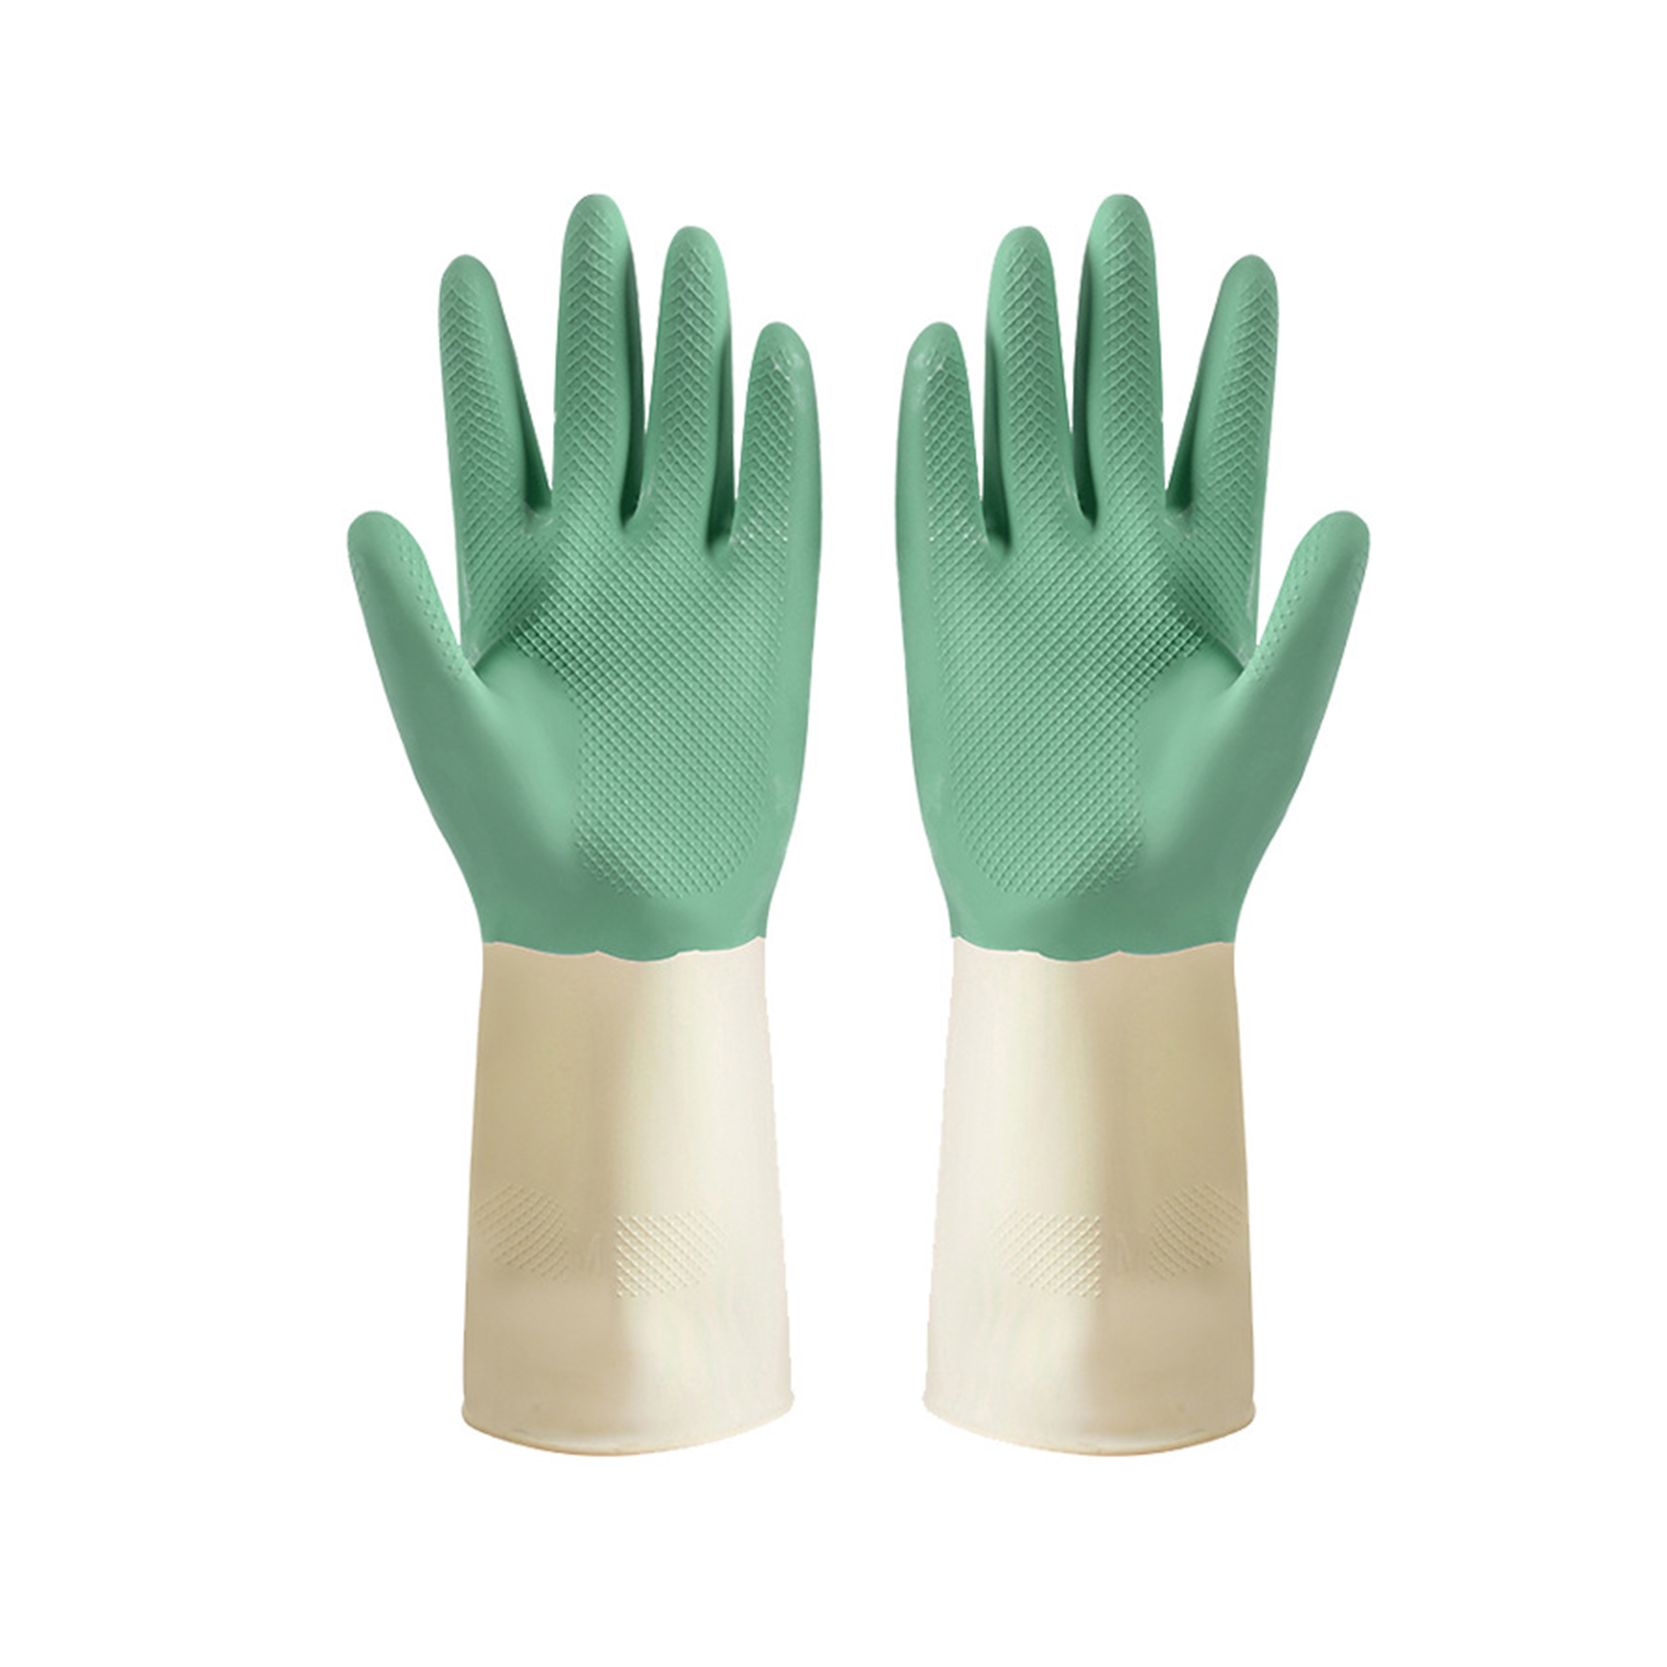 Rubber Gloves-Latex Free Kitchen Cleaning Gloves Household waterproof dishwashing Large